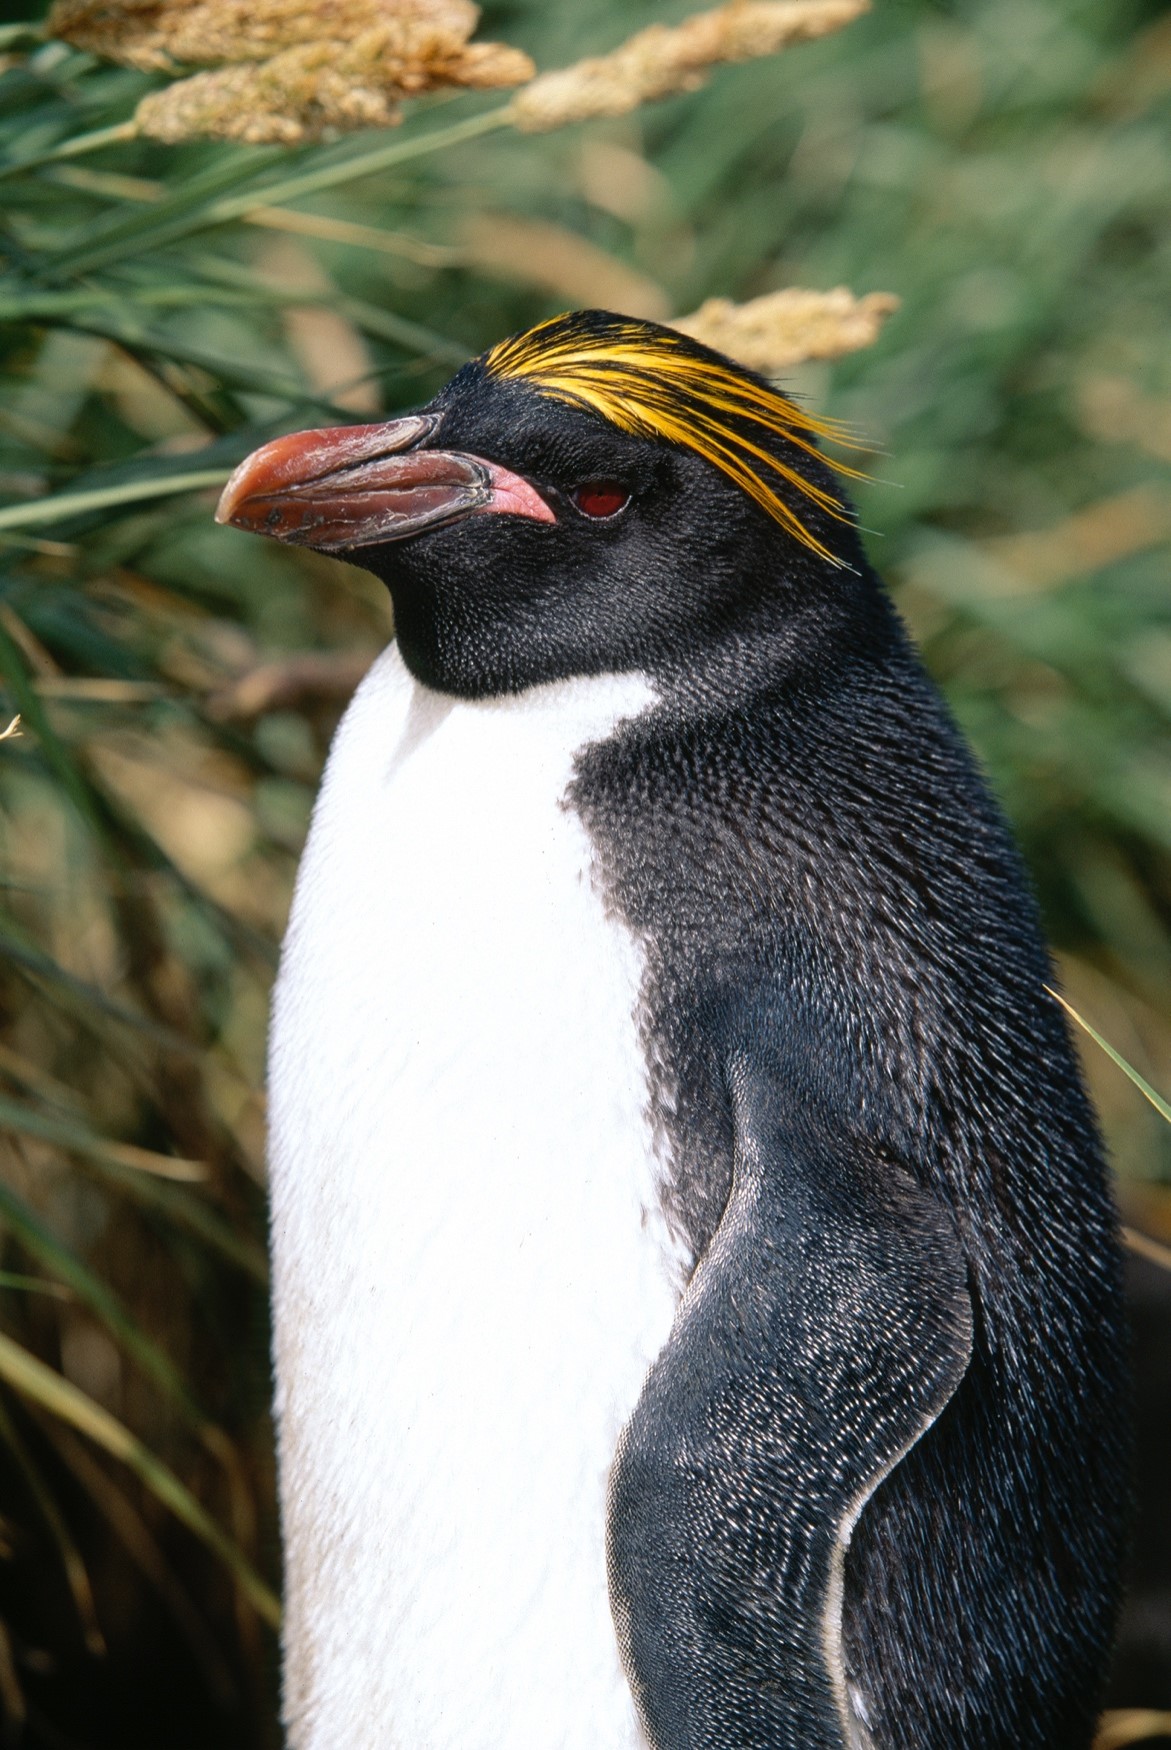 Macaroni Penguins are easily recognizable by their yellow crest that runs backwards from the center of their forehead to their nape.